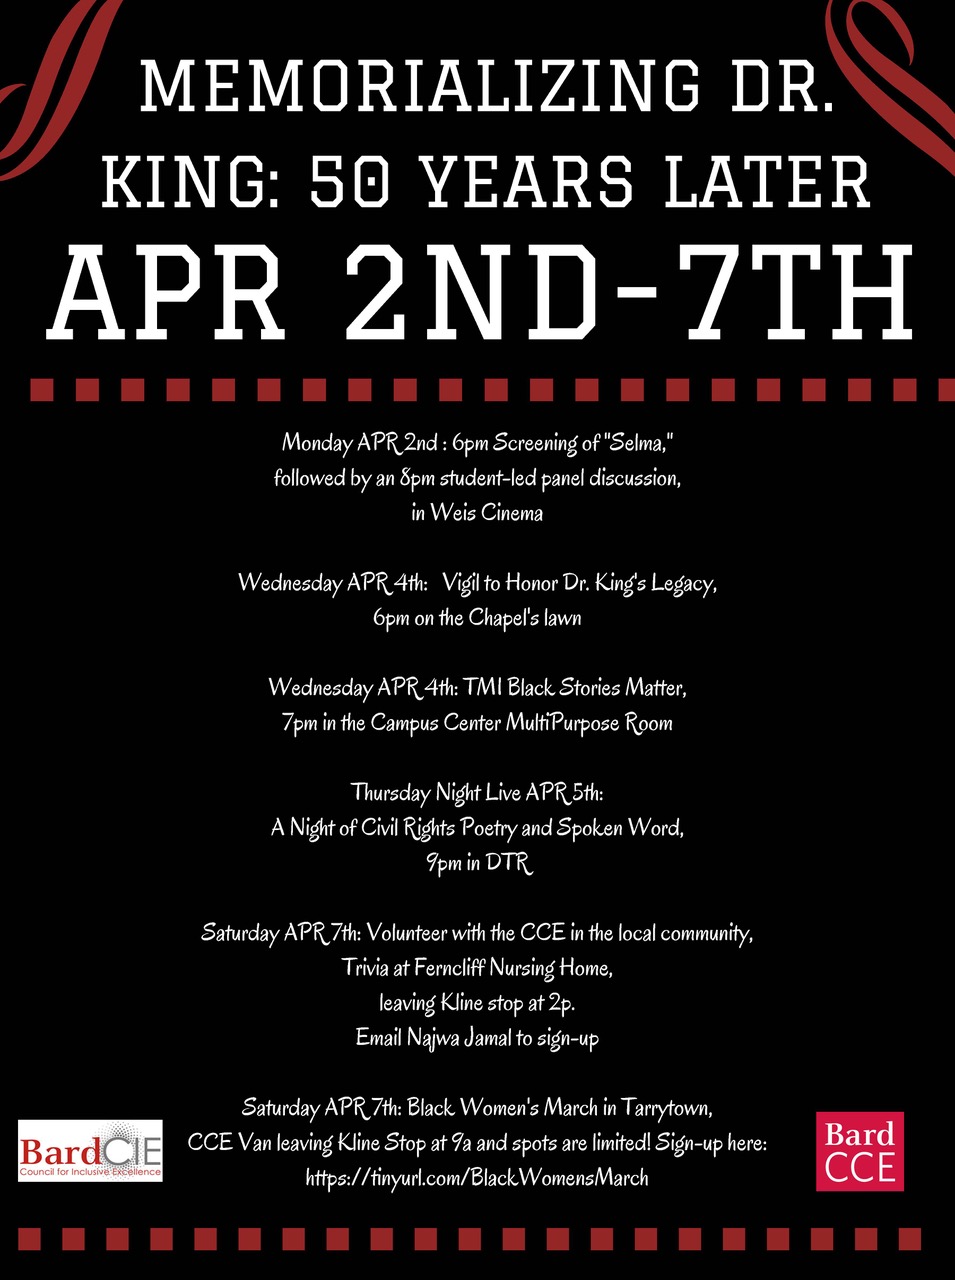 Memorializing Dr. King: 50 Years Later&mdash;A Night of Civil Rights Poetry and Spoken Word